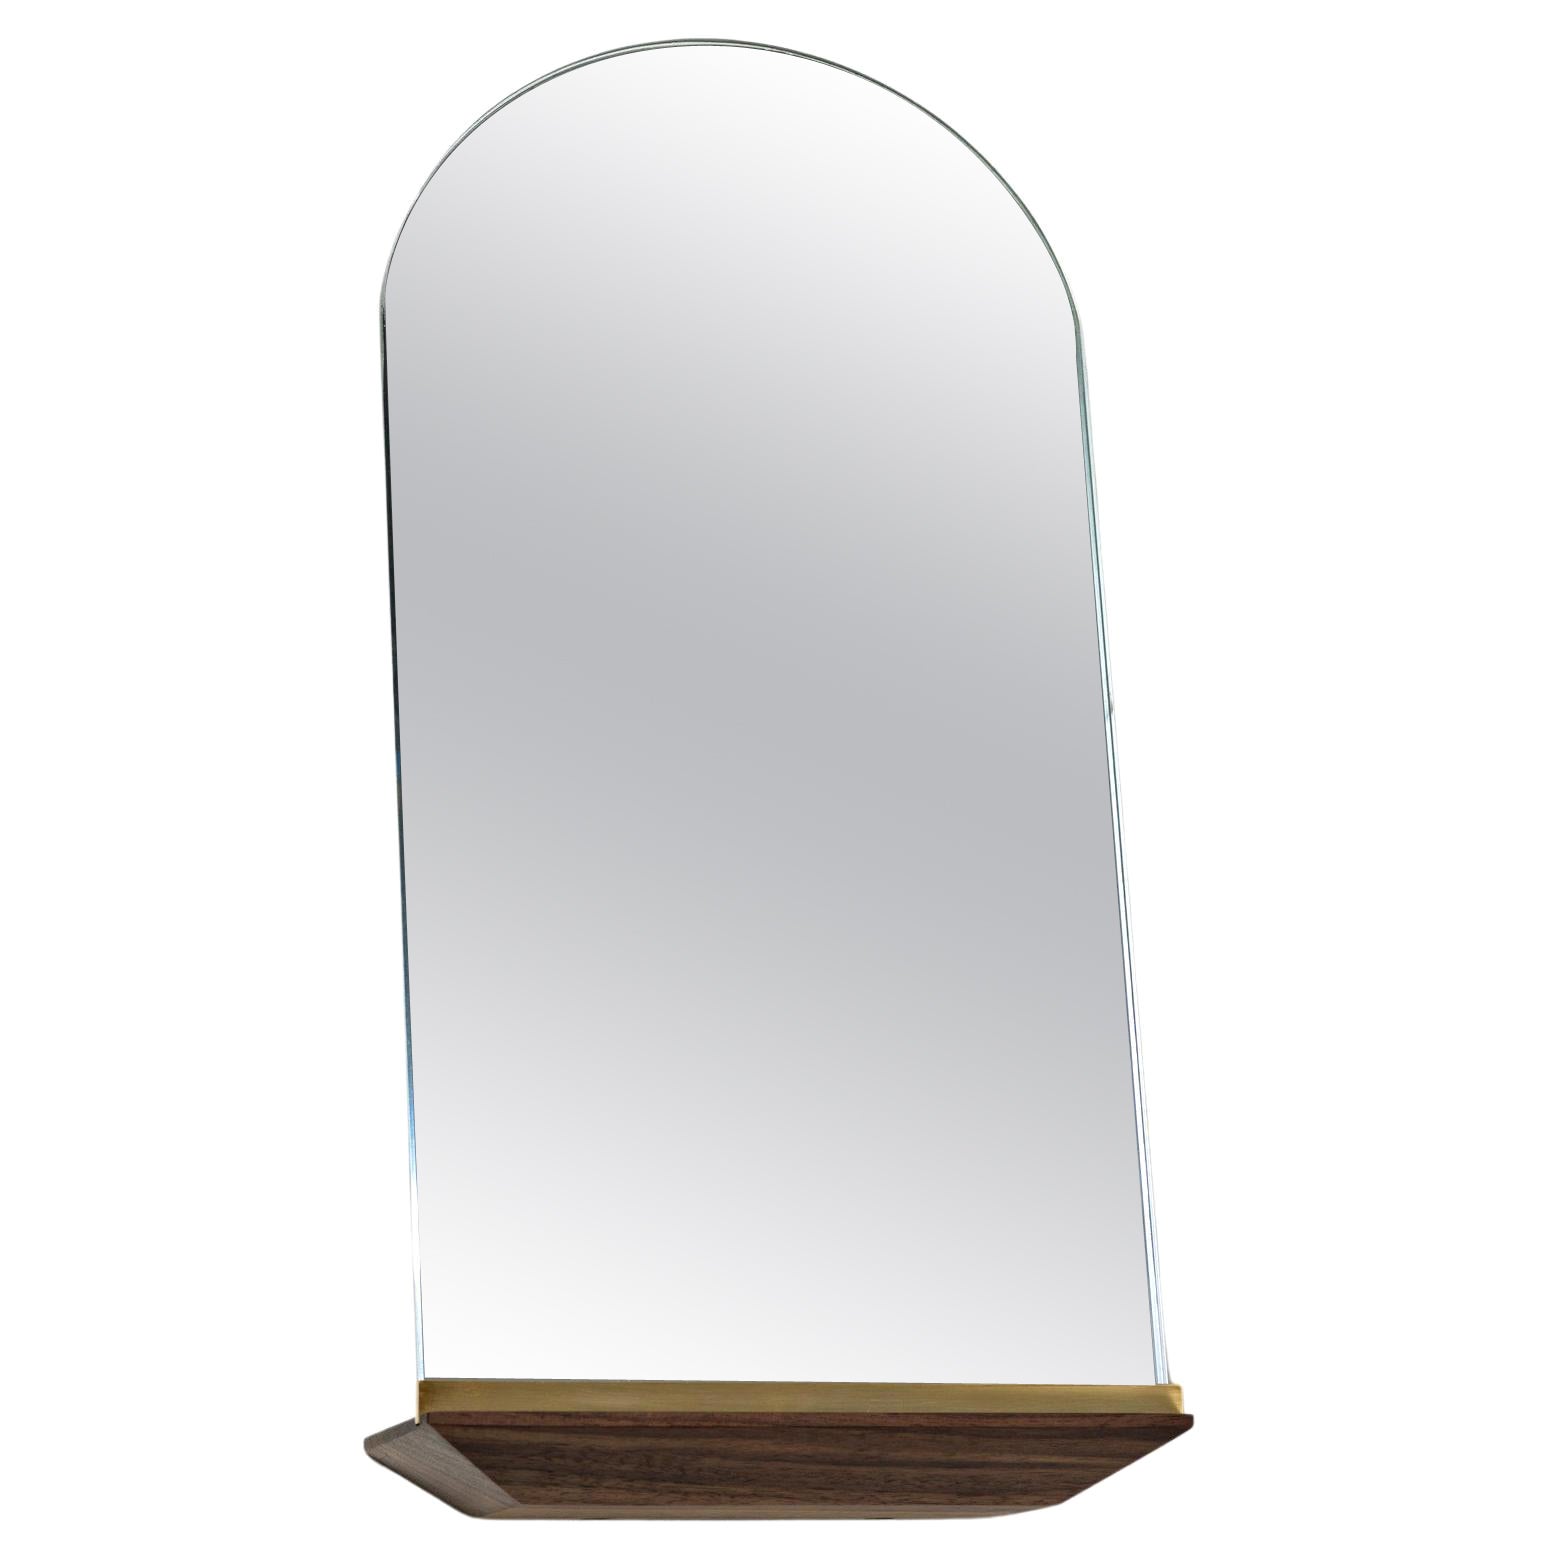 Daily-Use Mirror #1 by Phaedo For Sale